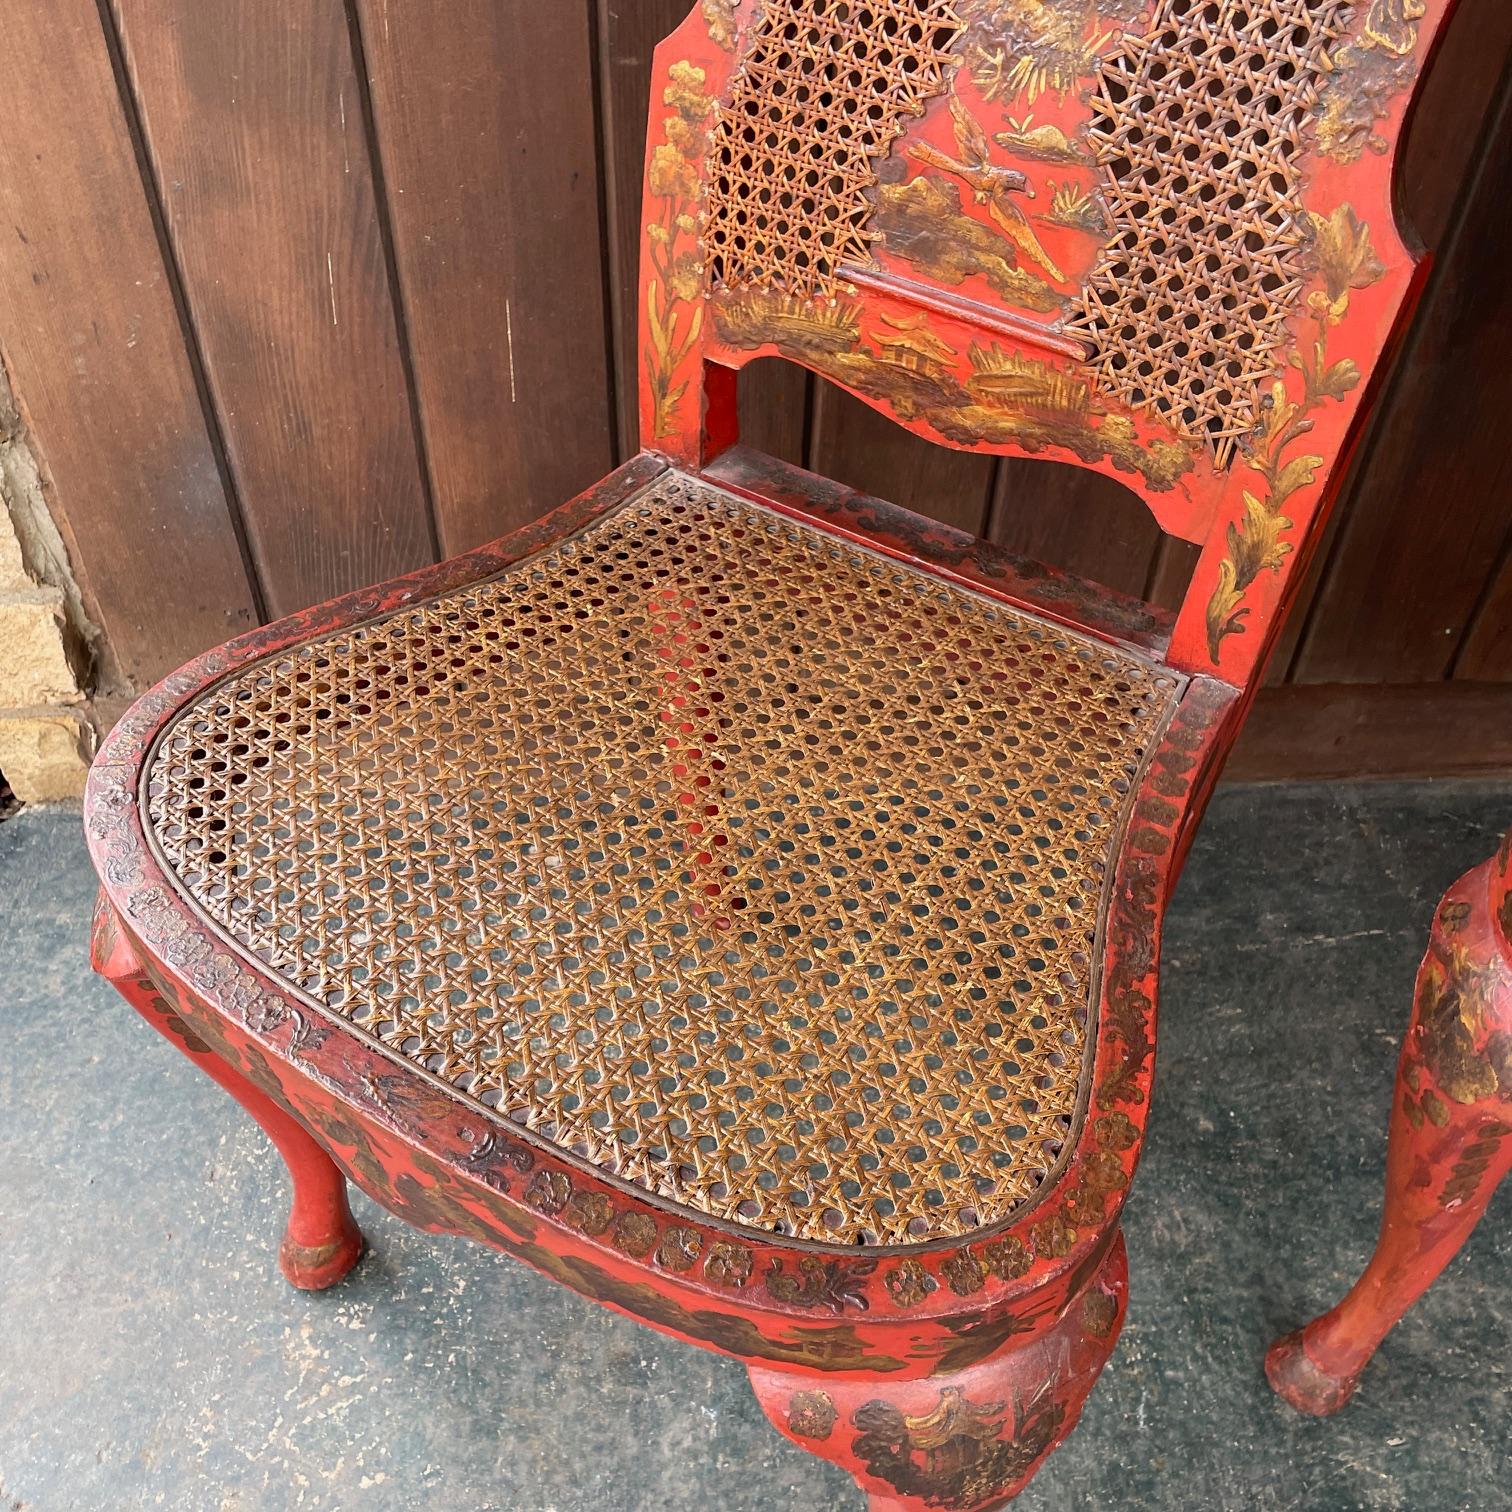 Paint 19th Century English Queen Anne Accent Chairs Red Lacquered Chinoiserie Japanned